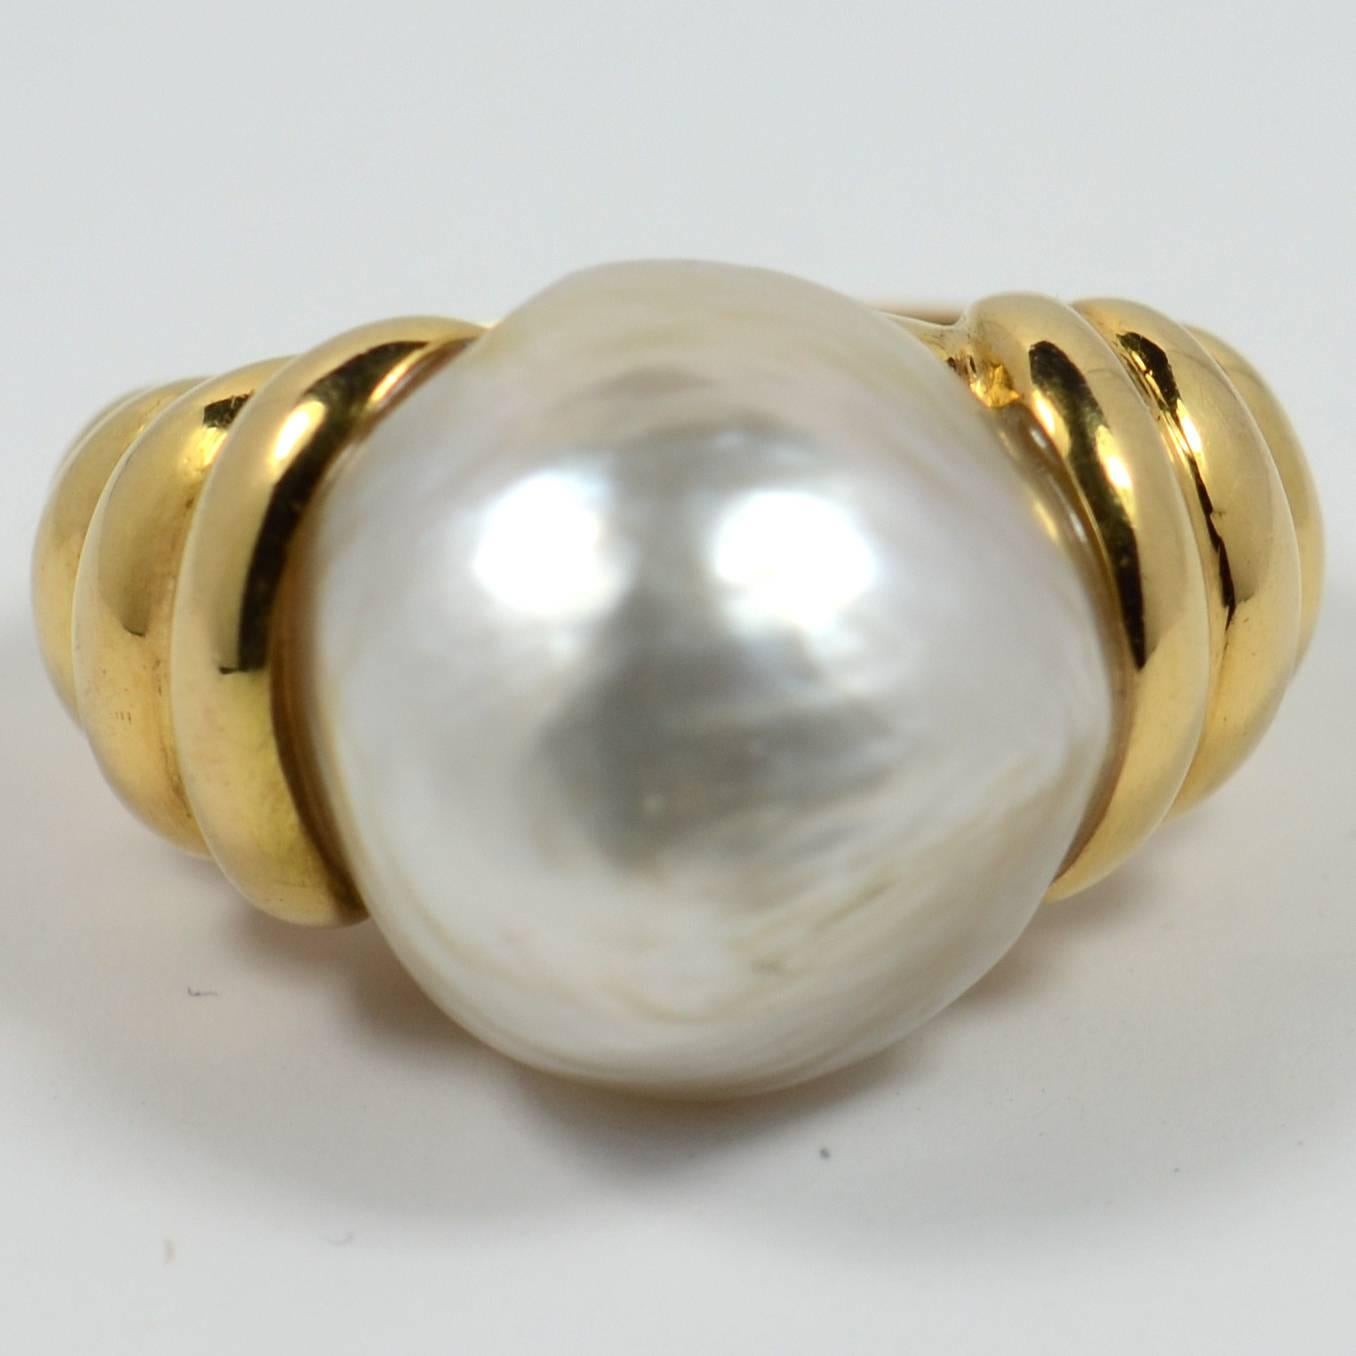 This gorgeous ring by Christine Escher has a voluptuous form with swirls of 18 carat yellow gold rising to meet a large, slightly baroque mabé pearl with tones of gold to its whiteness.  The pearl measures 15.5mm x 16mm x 10.5mm. 

The ring is